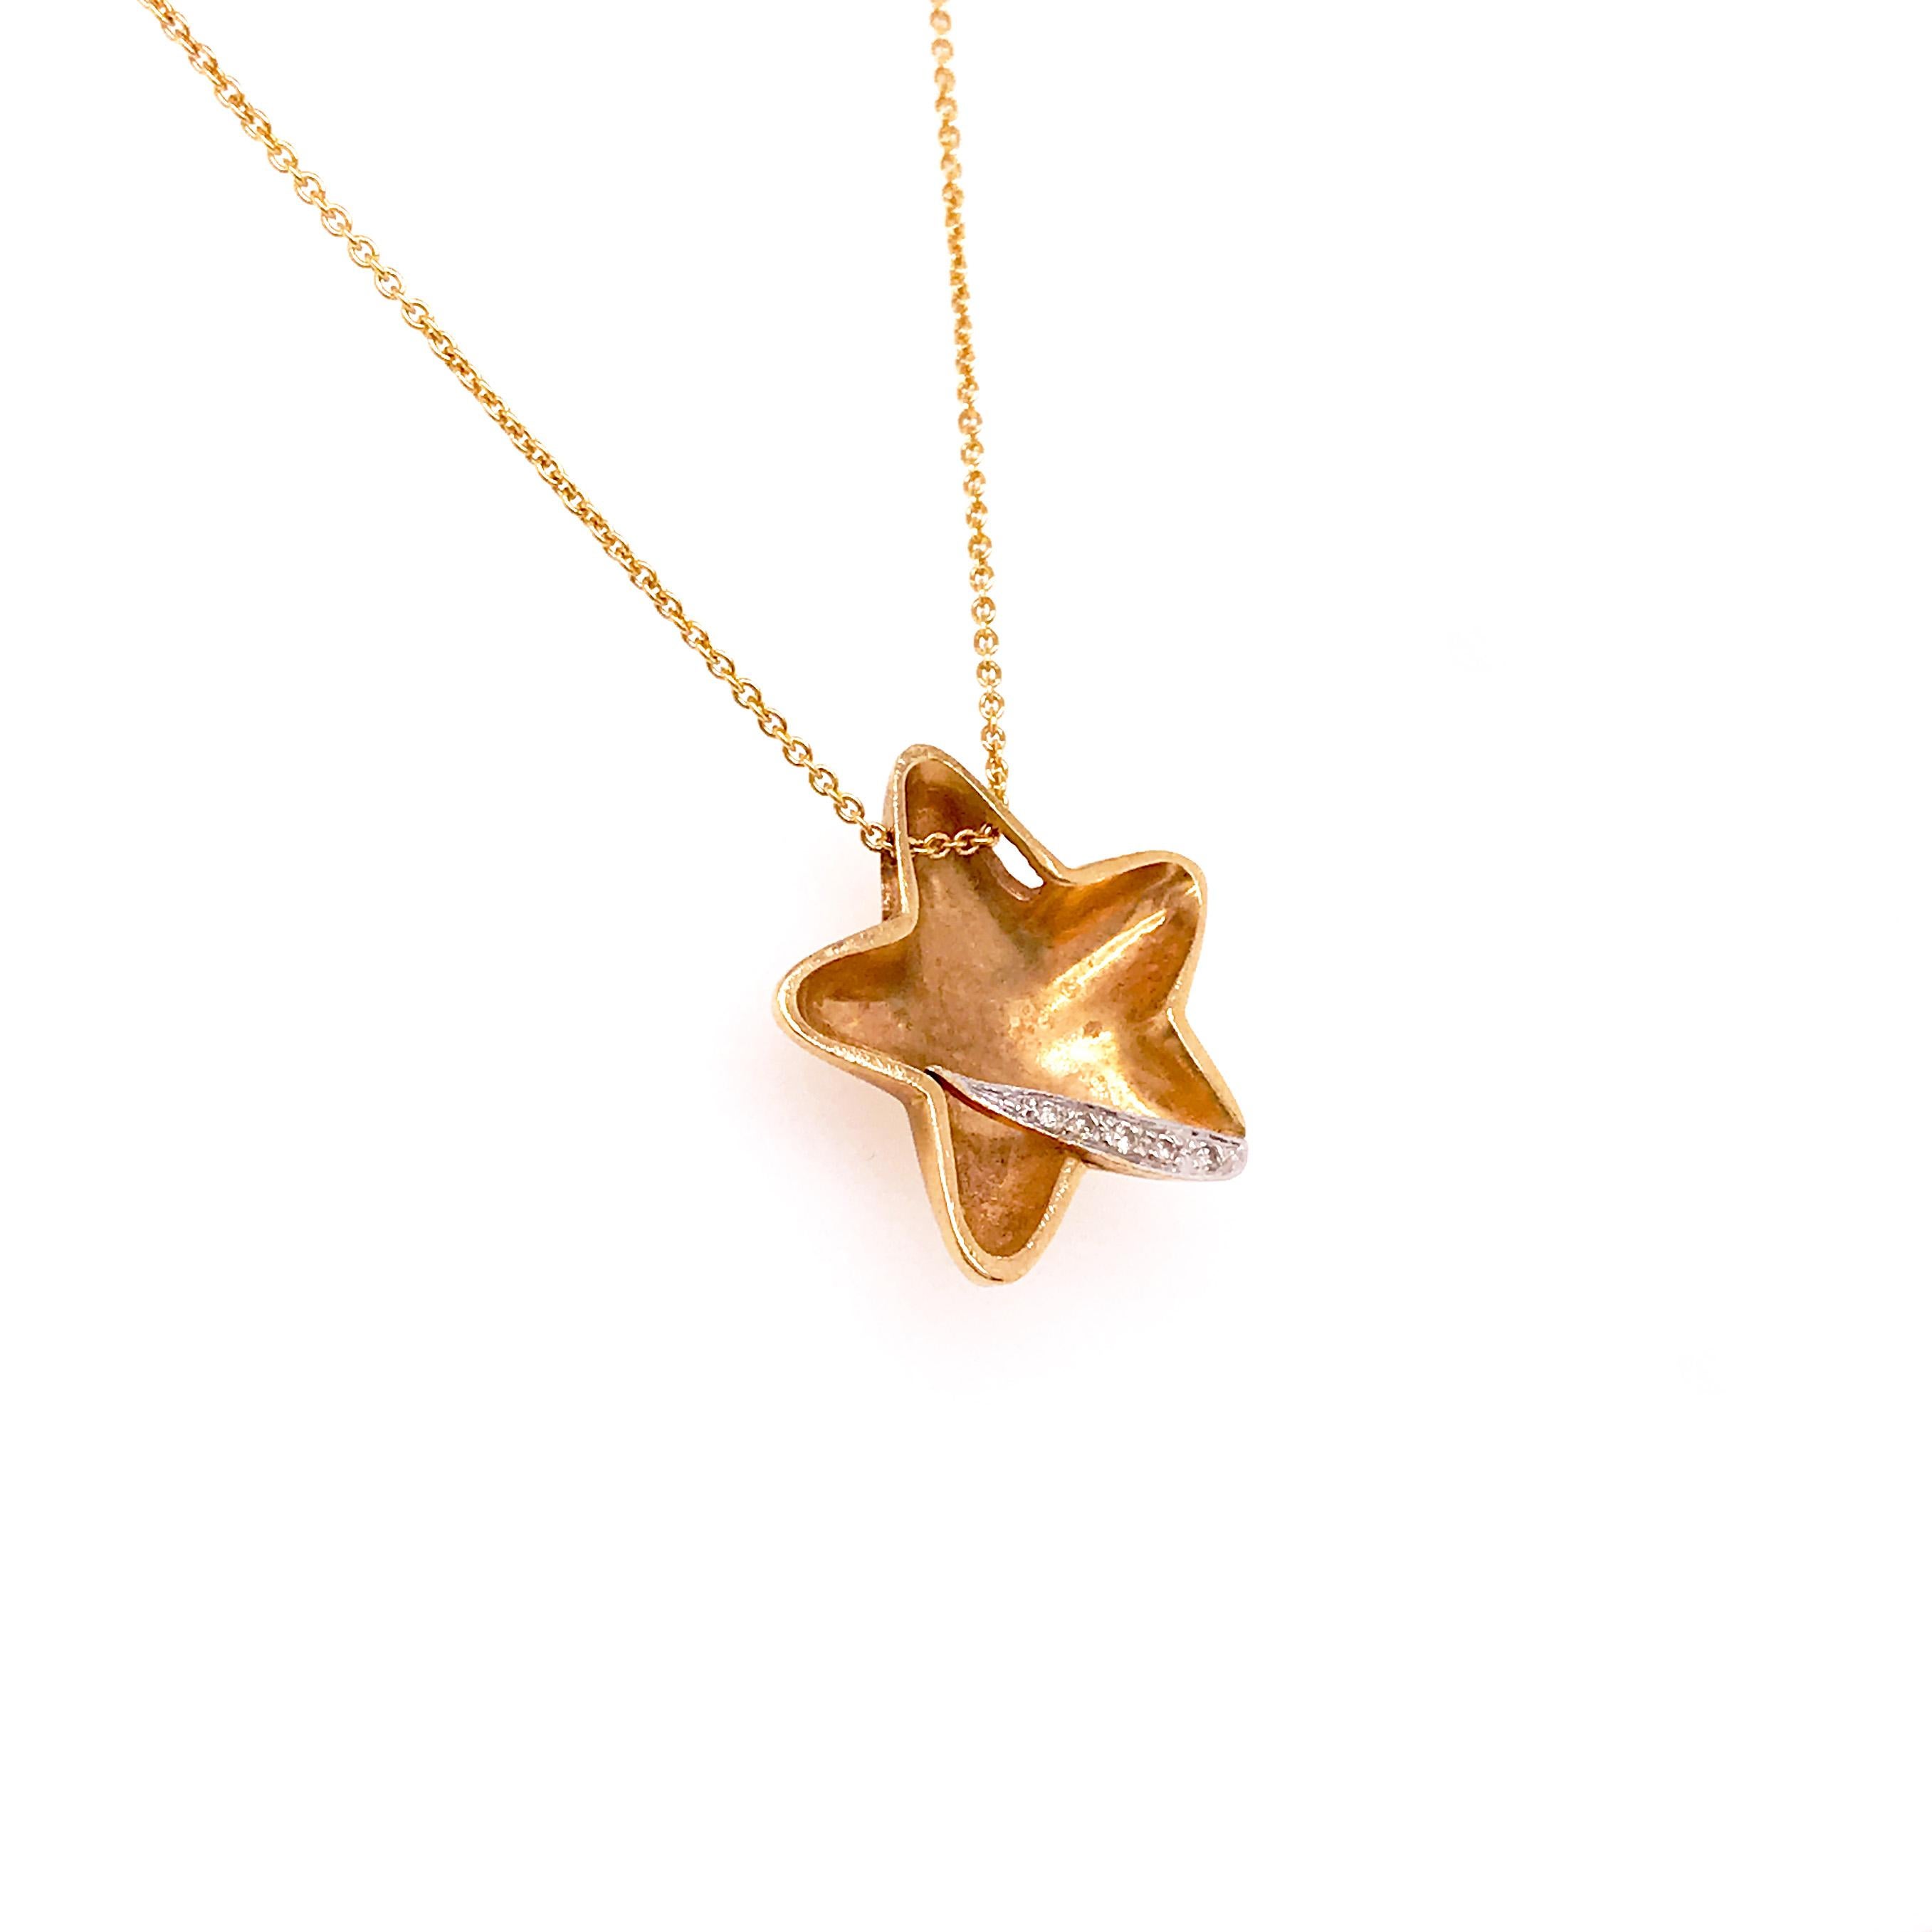 This is a one of a kind designer Pirouettes piece. A yellow gold star charm/pendant with a diamond 